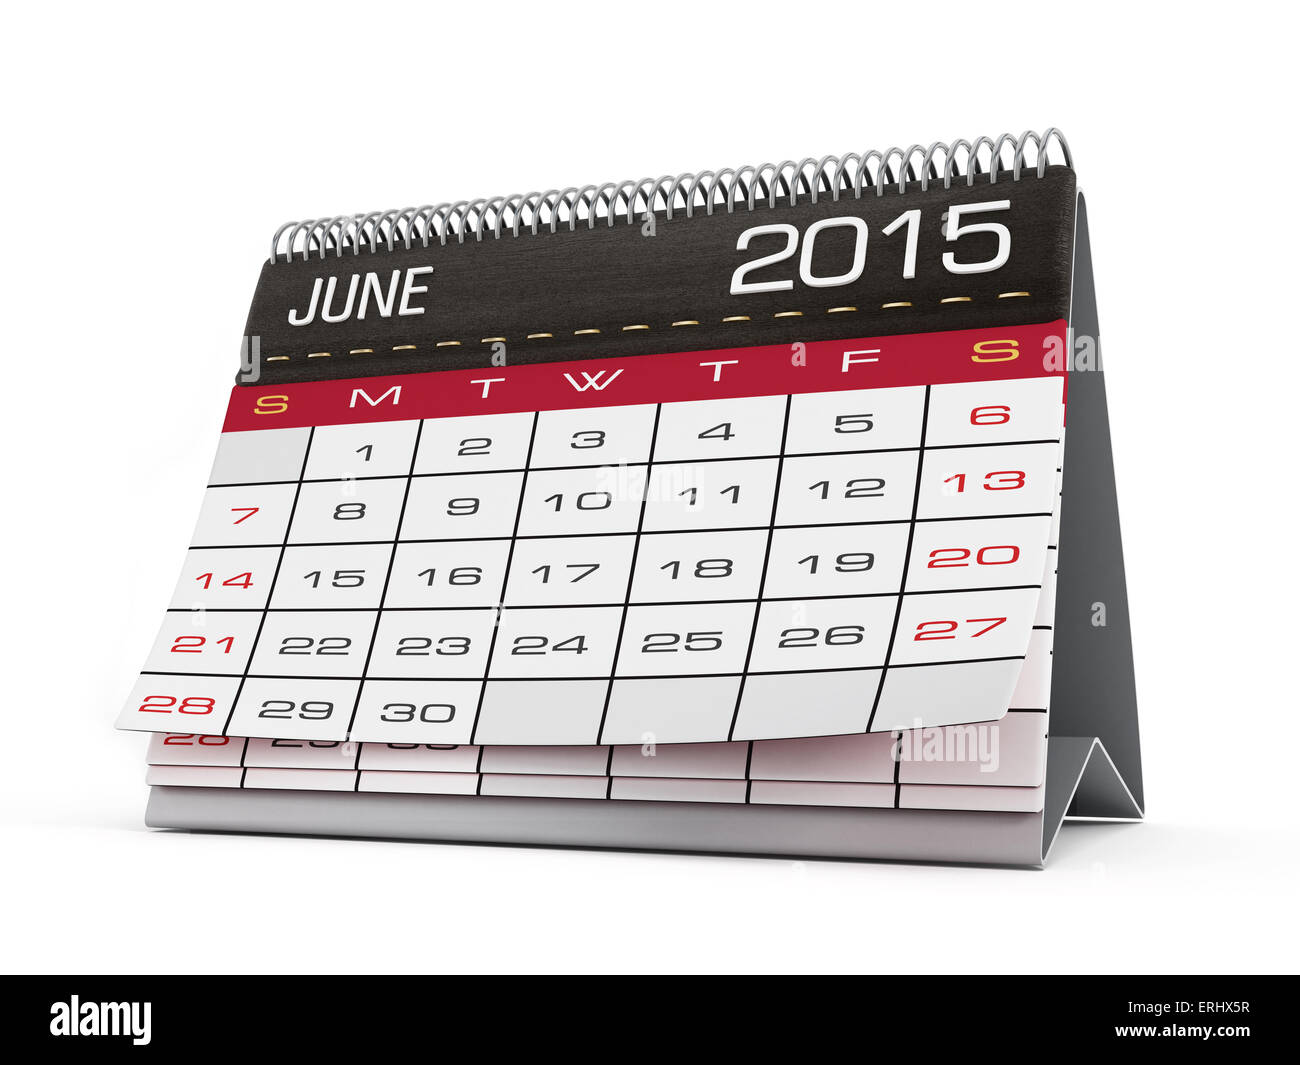 June 15 Calendar Page Isolated On White Stock Photo Alamy